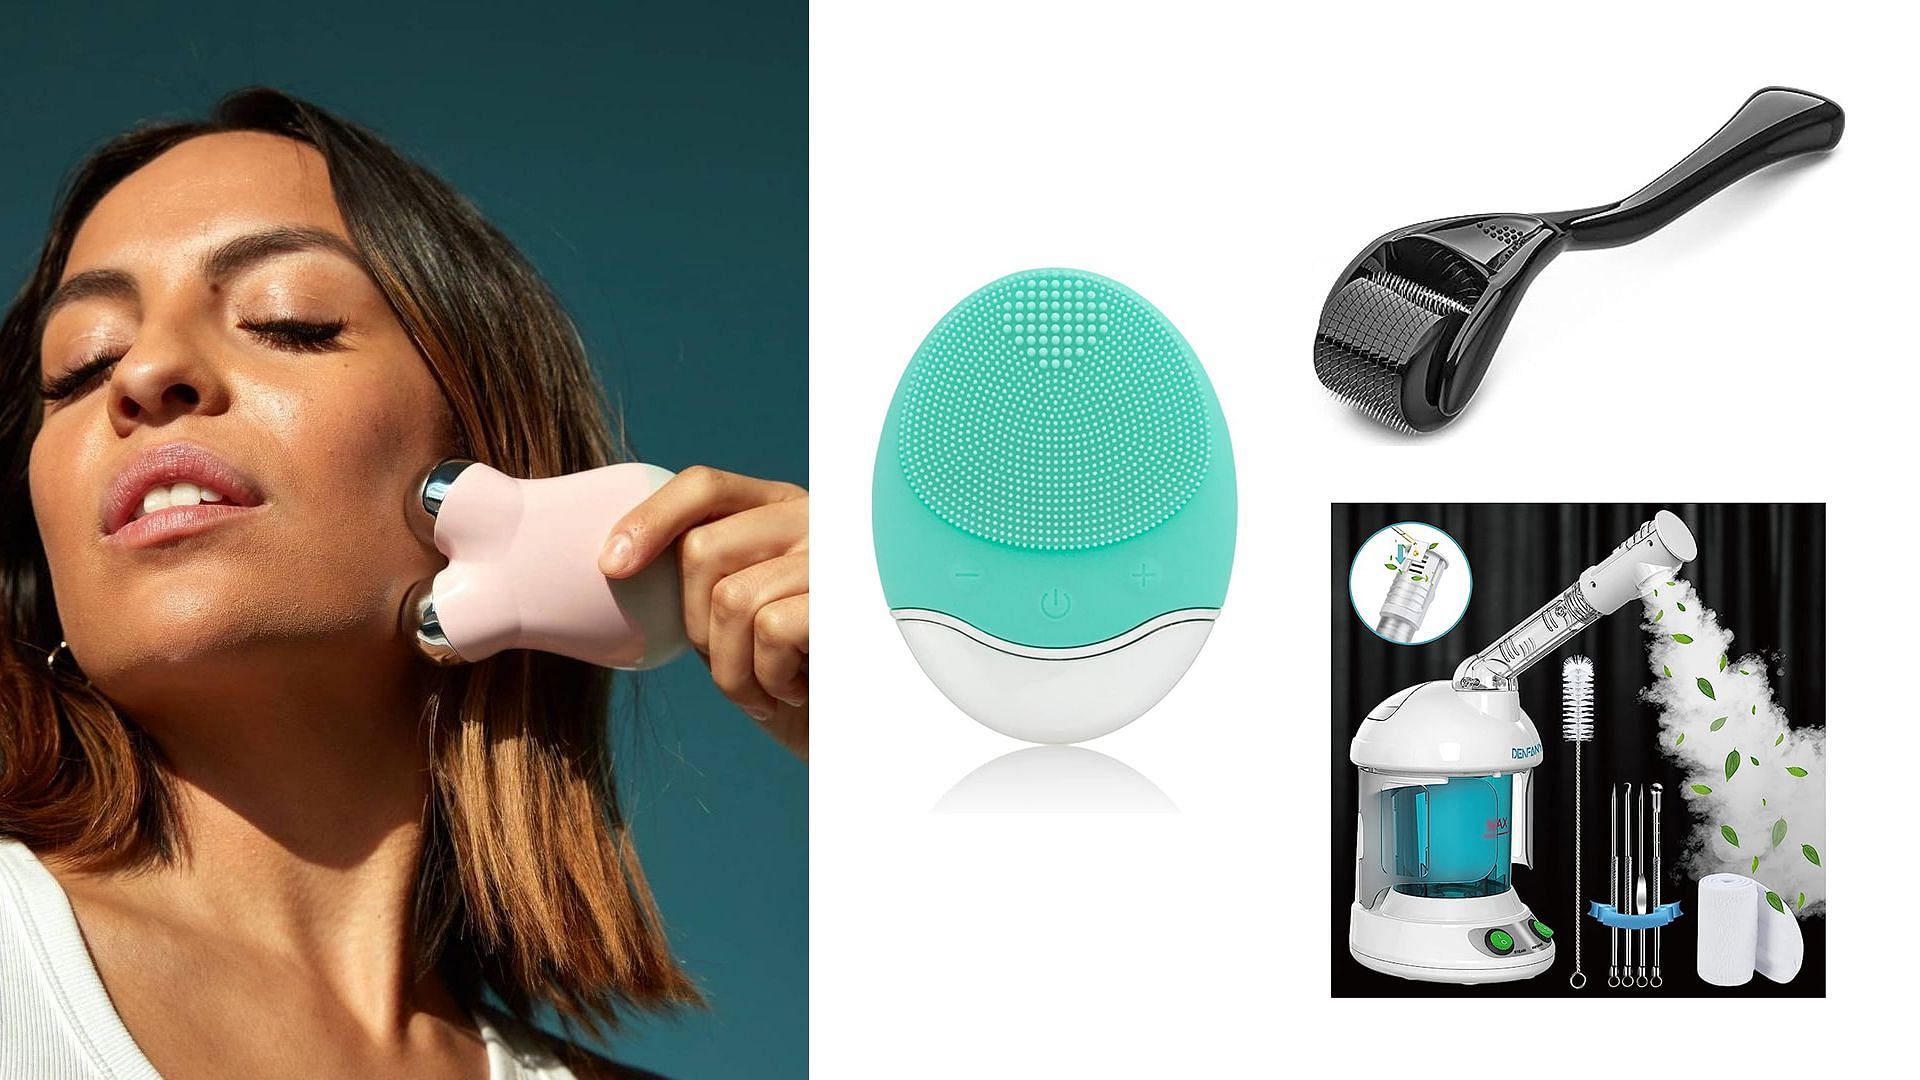 5 new beauty tools and devices launched in 2023